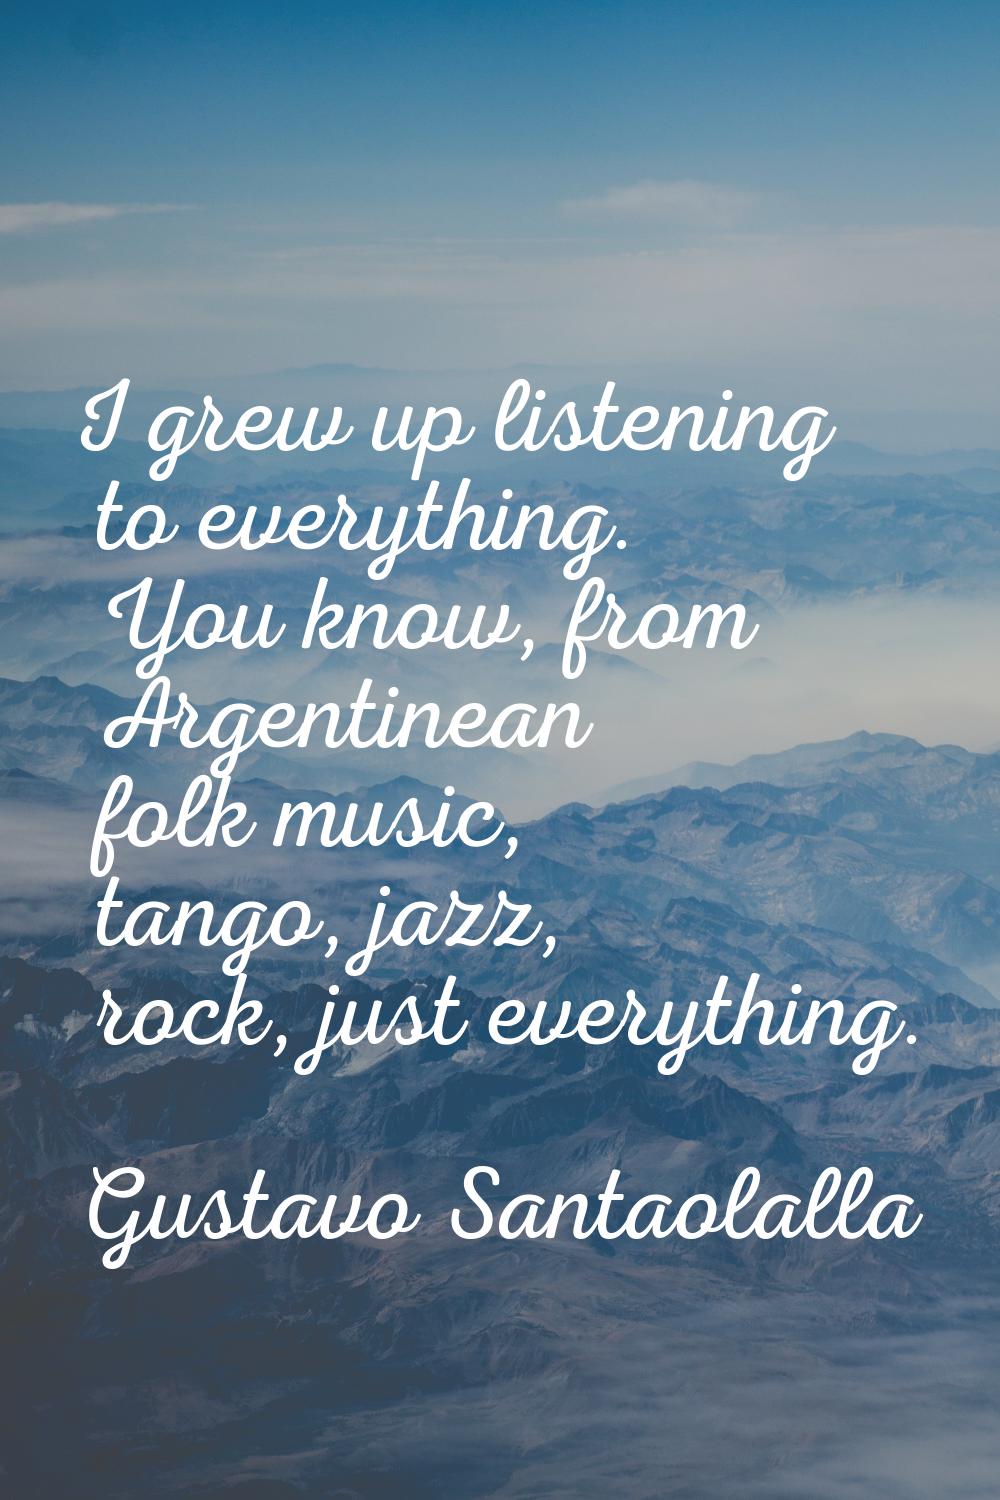 I grew up listening to everything. You know, from Argentinean folk music, tango, jazz, rock, just e